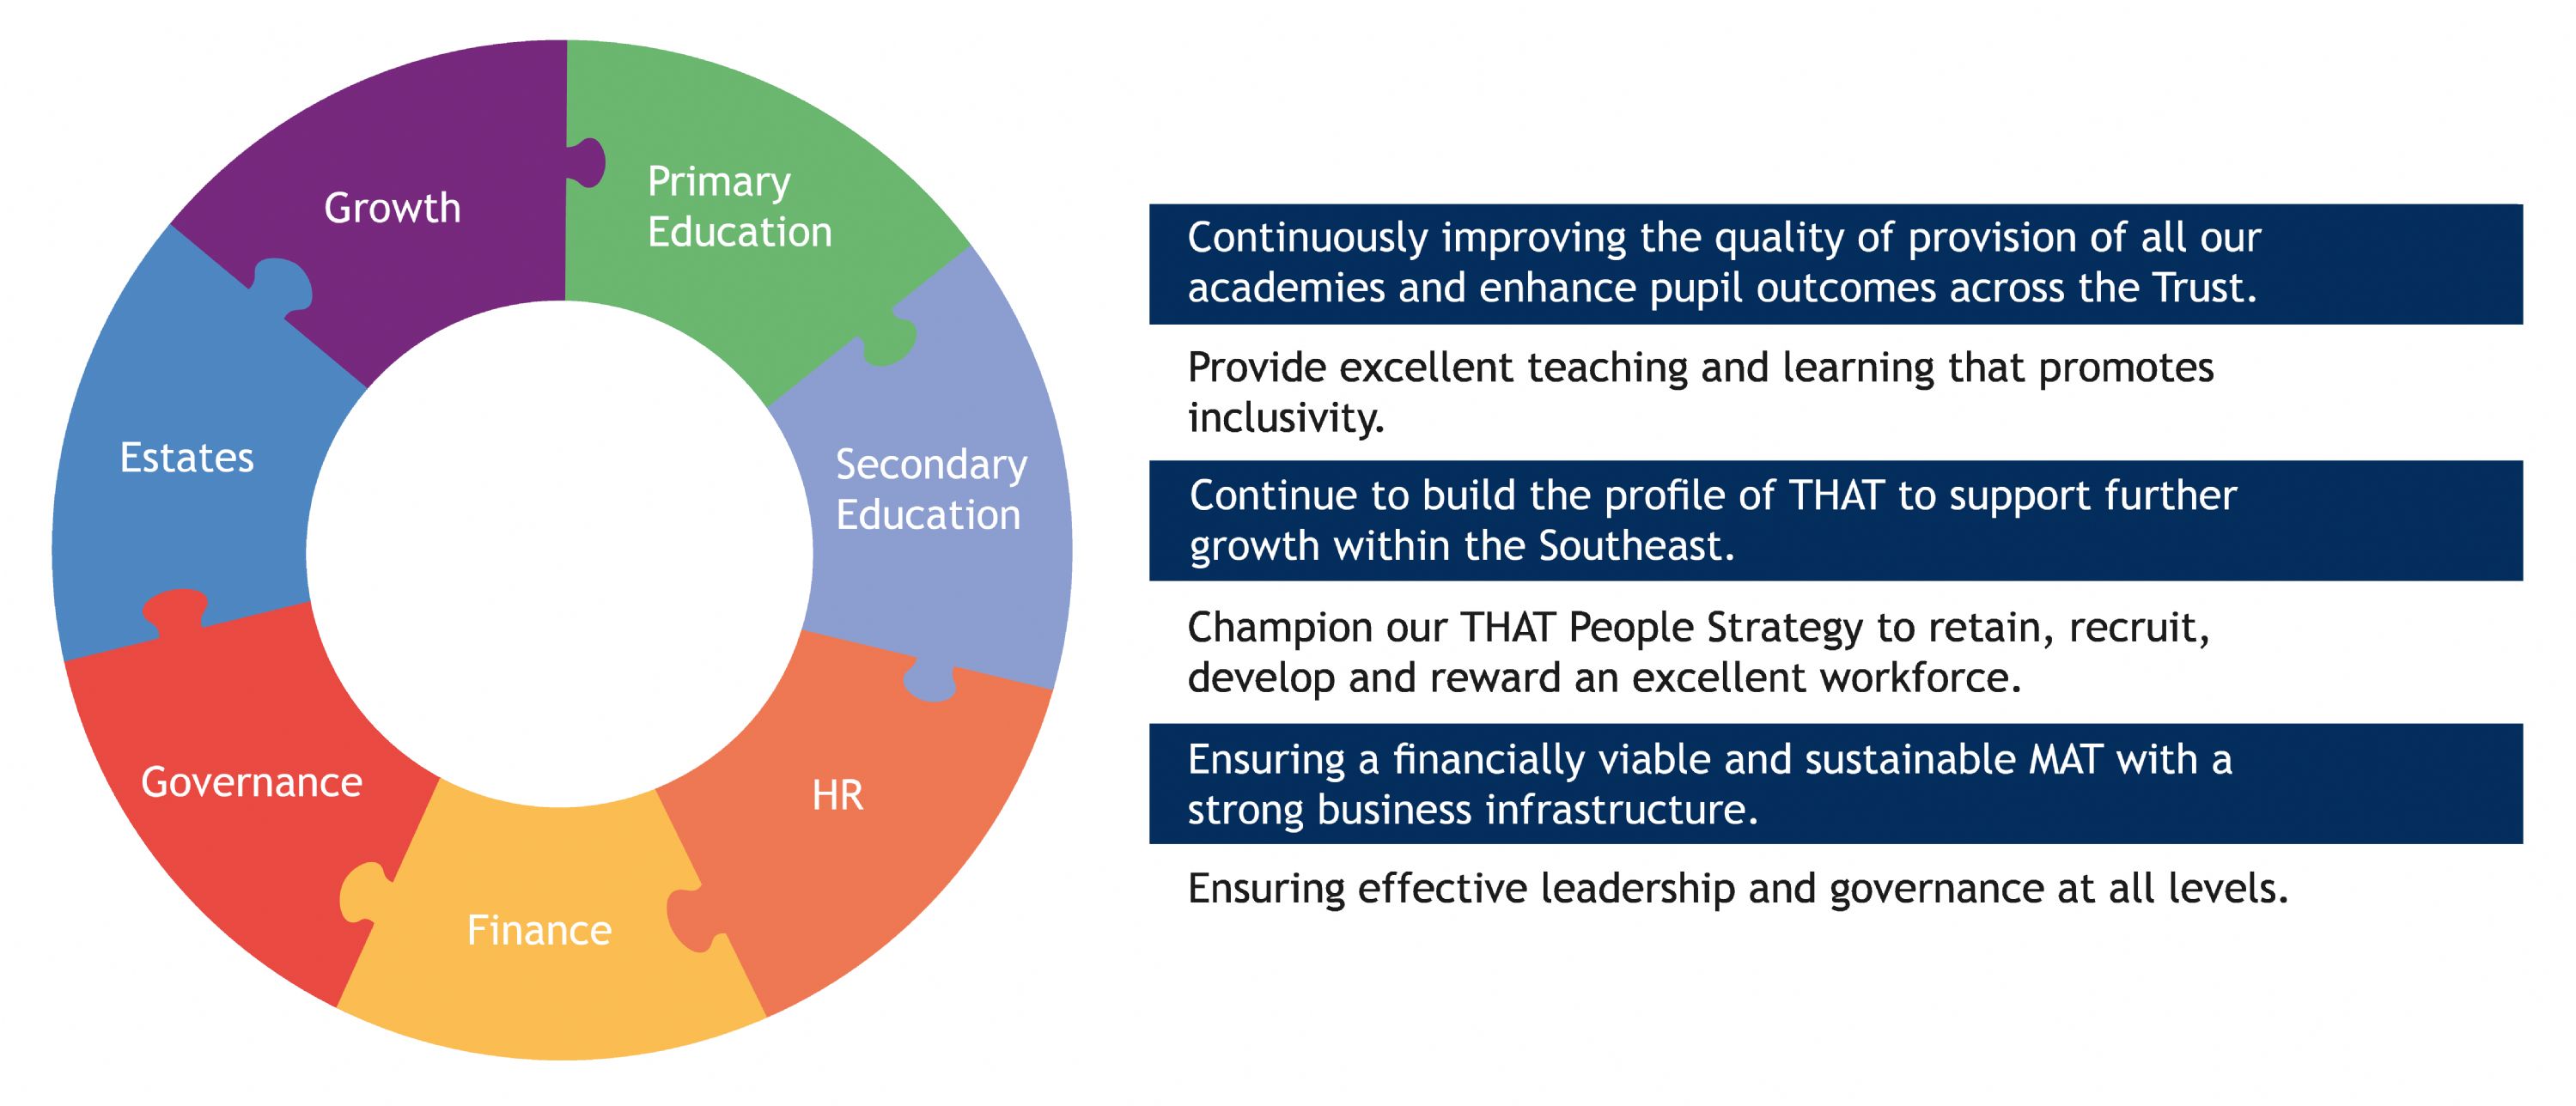 A graphic shows the key areas: Growth, Primary Education, Secondary Education, HR, Finance, Governance, Estates